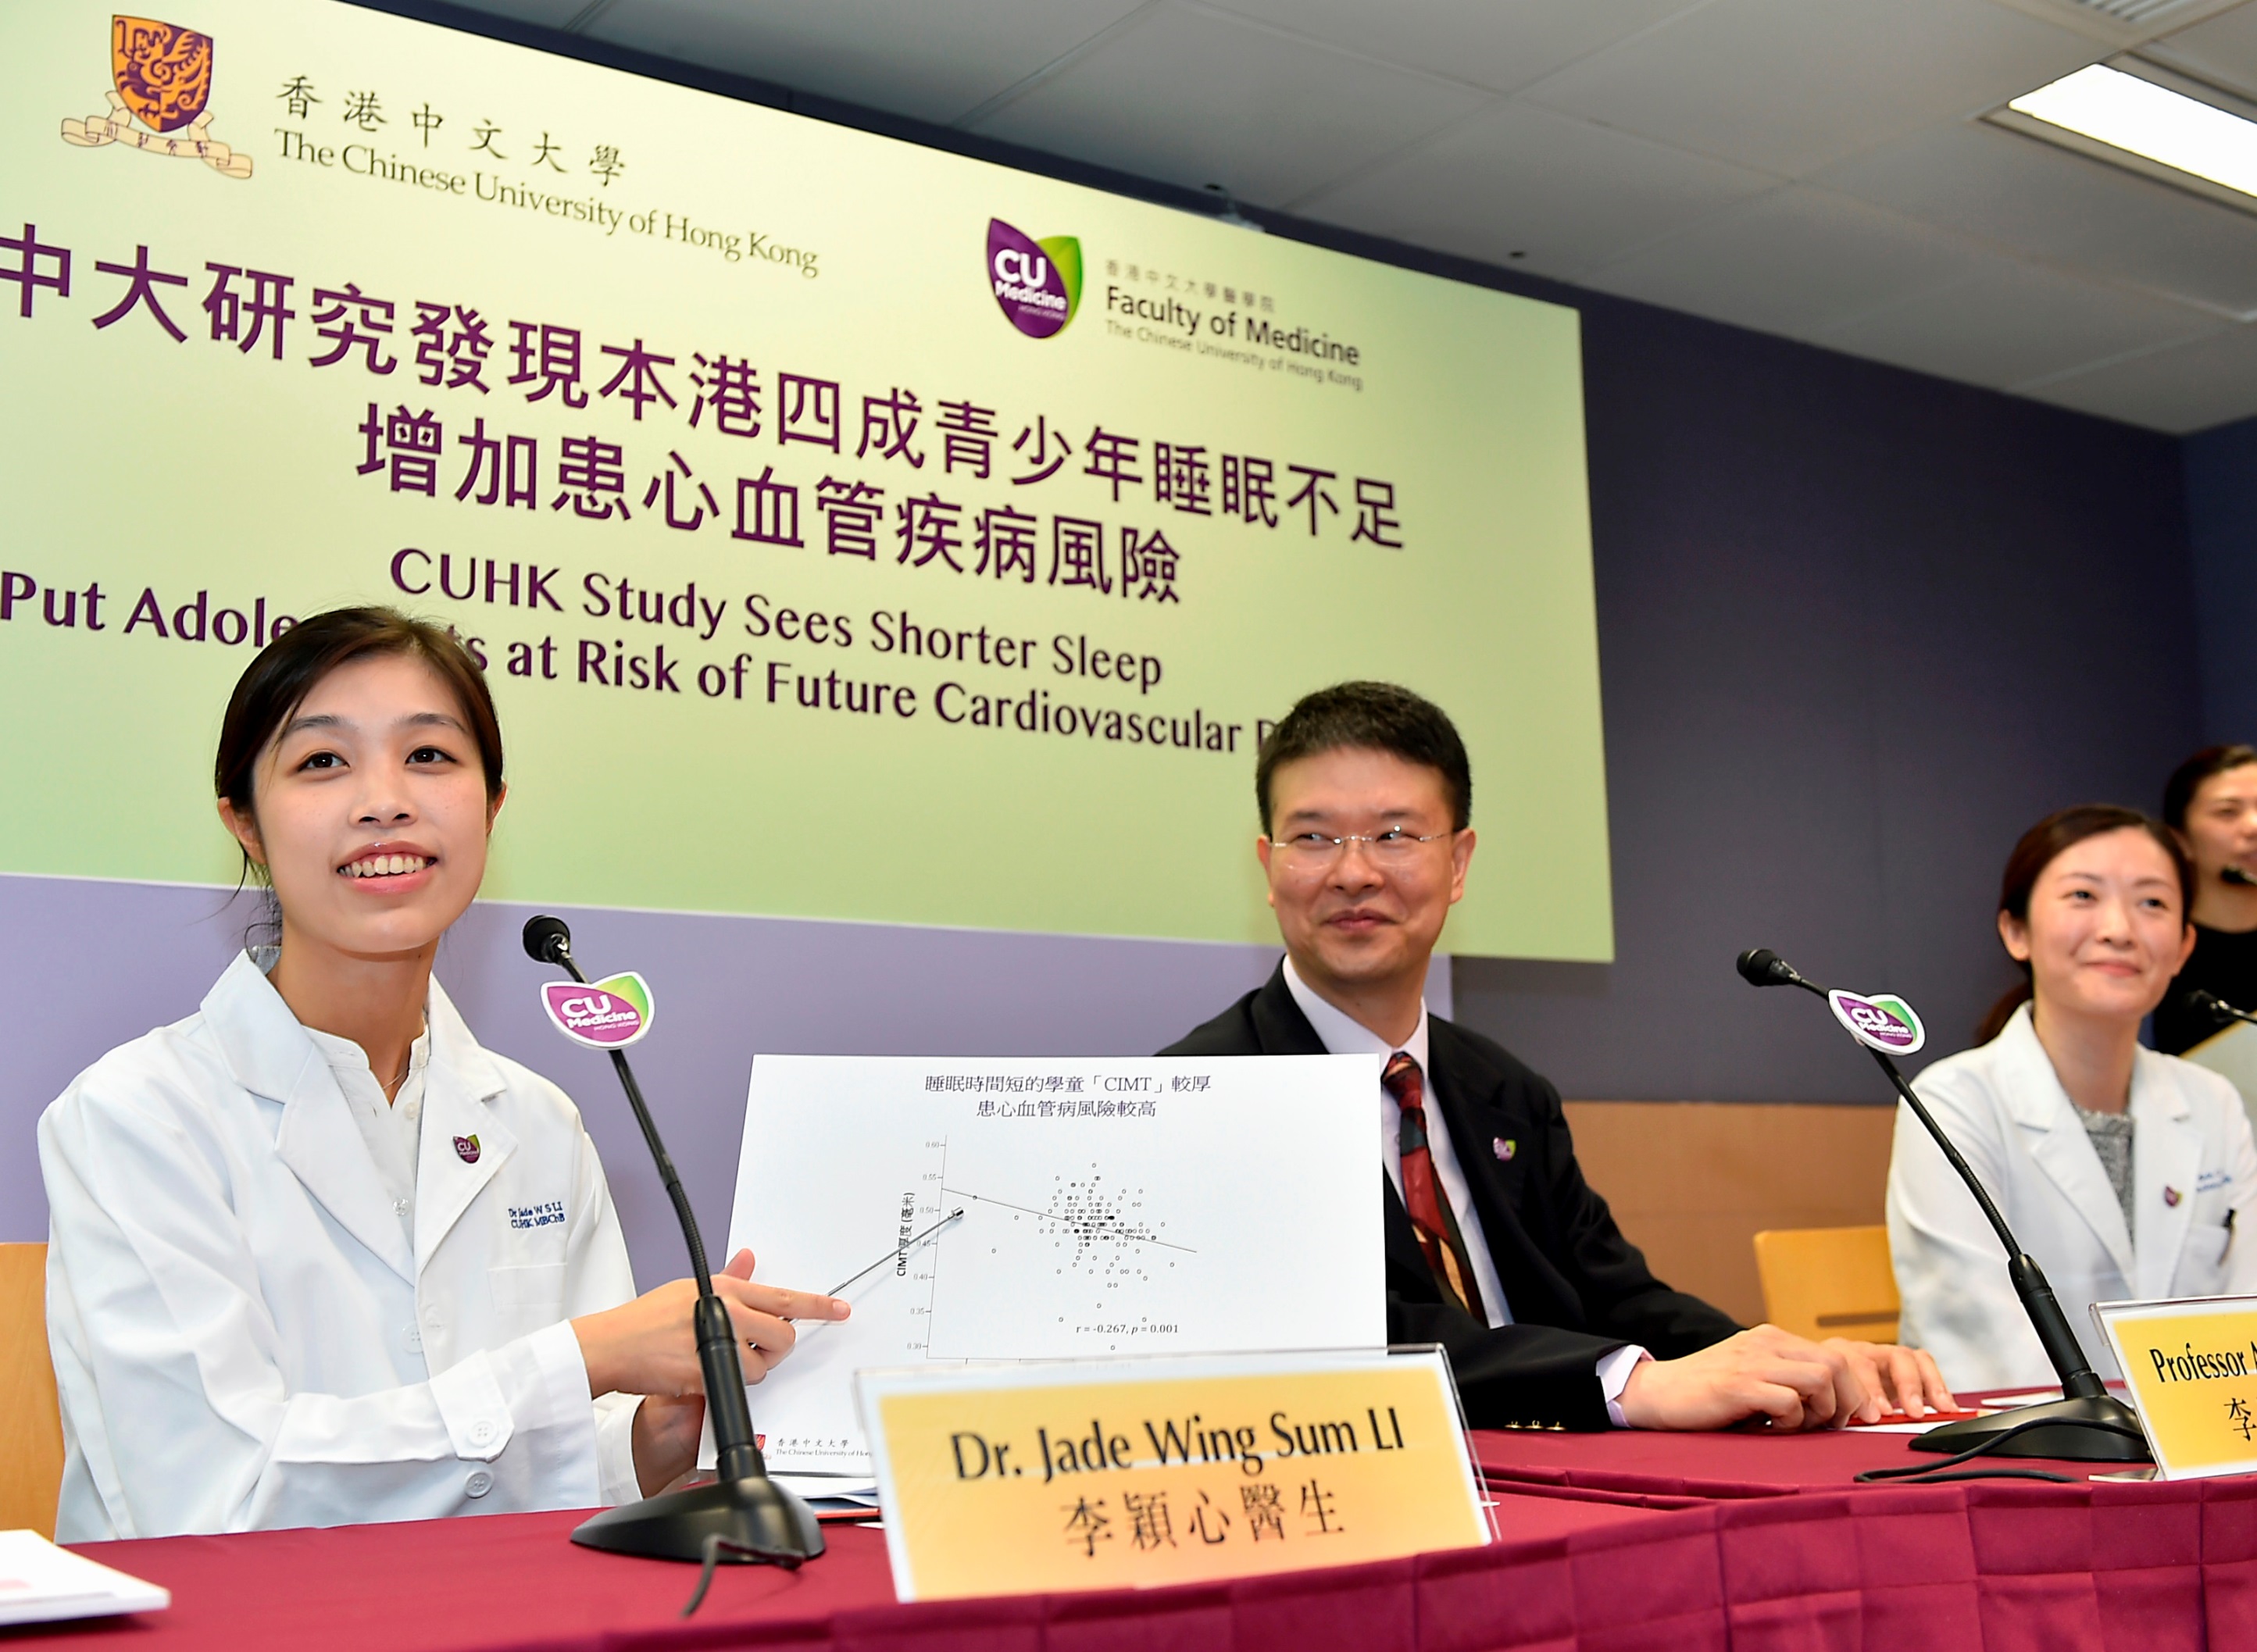 (From left) Dr. Jade LI, fresh medical graduate of CUHK; Professor Albert LI and Dr. Kate CHAN, both from the Department of Paediatrics of the Faculty of Medicine at CUHK